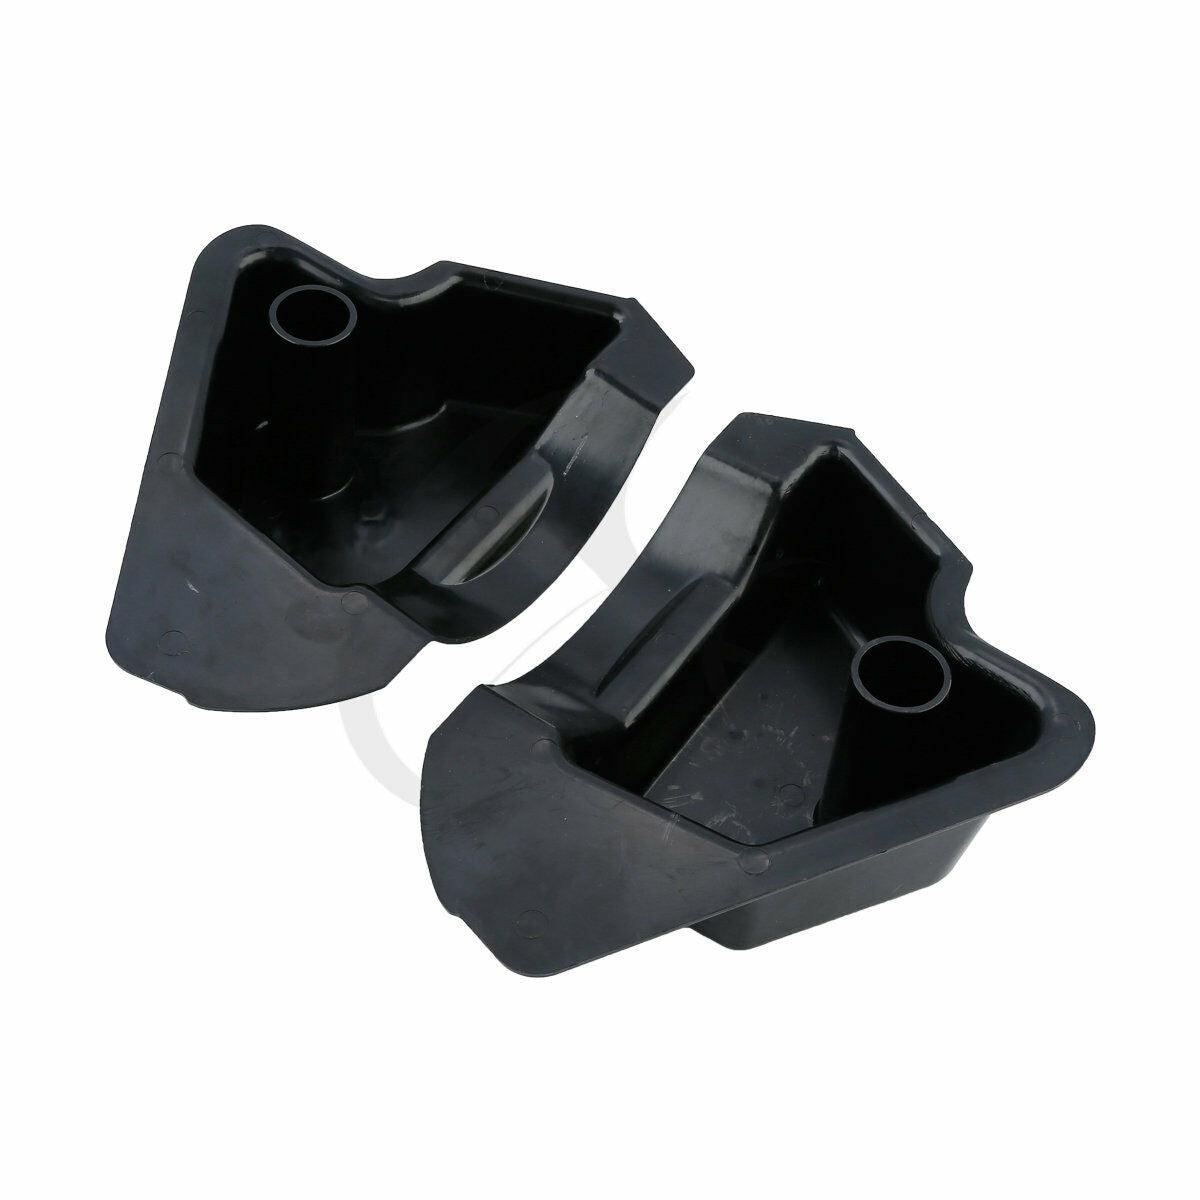 Black Lower Fairing Speaker Enclosure Fit For Harley Electra Street Glide 14-21 - Moto Life Products